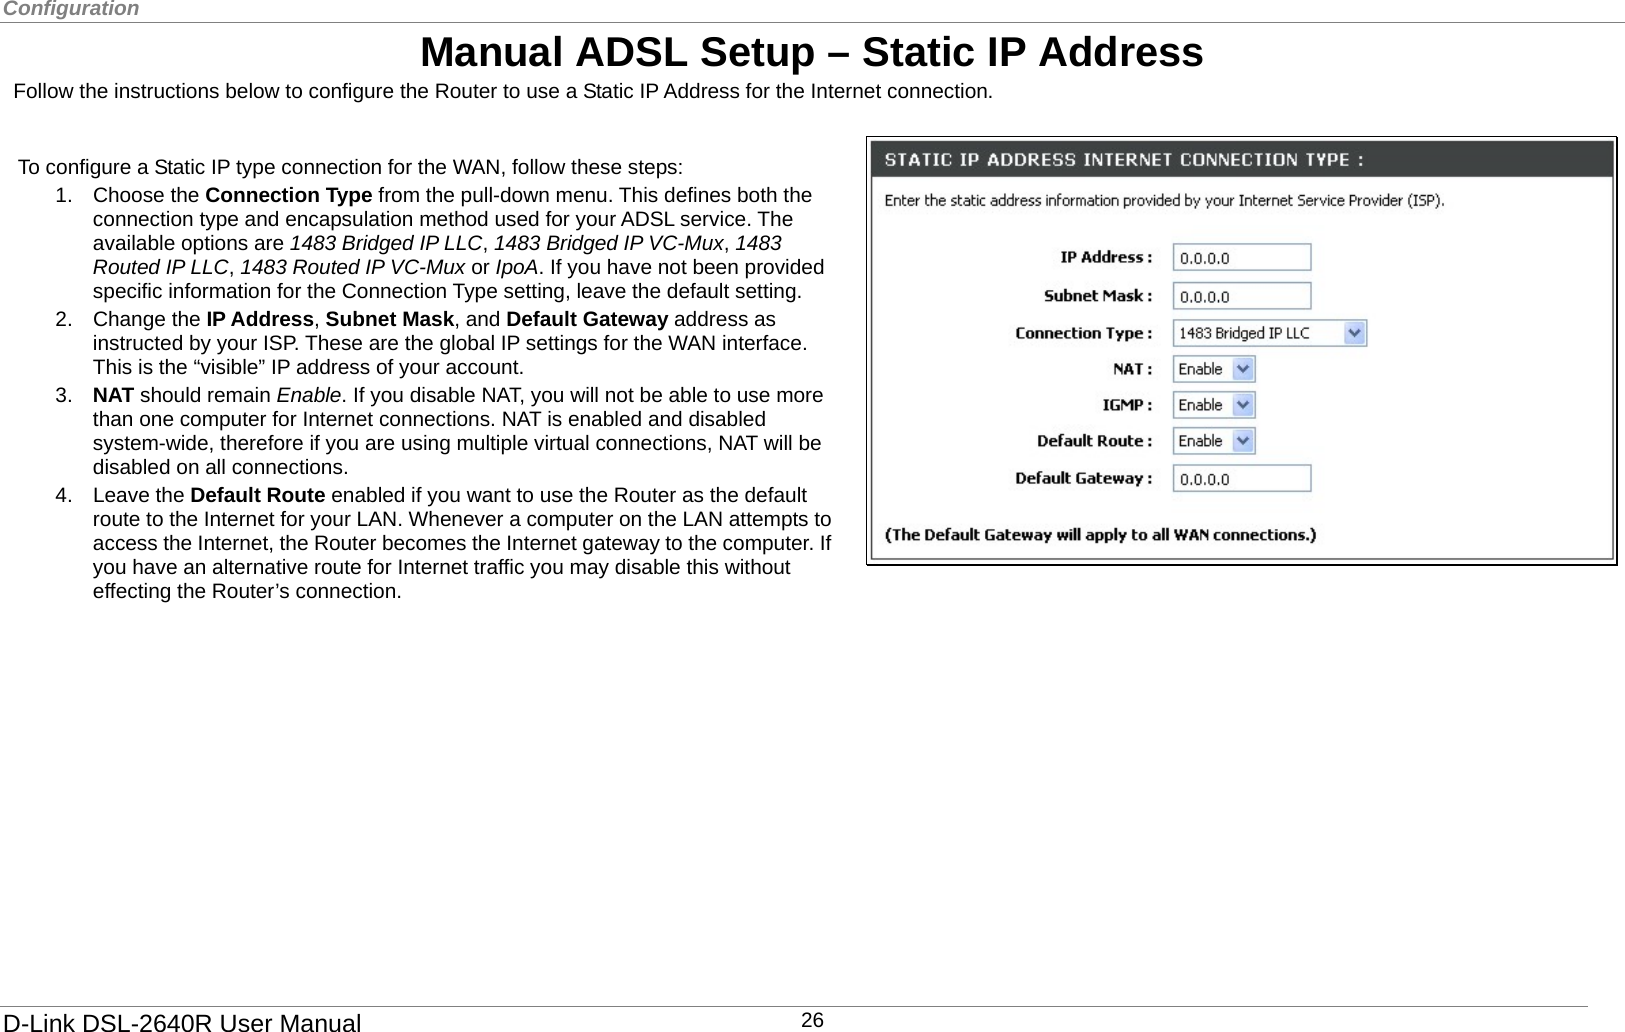 Configuration  Manual ADSL Setup – Static IP Address   Follow the instructions below to configure the Router to use a Static IP Address for the Internet connection.   4. Leave the Default Route enabled if you want to use the Router as the default route to the Internet for your LAN. Whenever a computer on the LAN attempts to access the Internet, the Router becomes the Internet gateway to the computer. If you have an alternative route for Internet traffic you may disable this without effecting the Router’s connection.   To configure a Static IP type connection for the WAN, follow these steps: 1. Choose the Connection Type from the pull-down menu. This defines both the connection type and encapsulation method used for your ADSL service. The available options are 1483 Bridged IP LLC, 1483 Bridged IP VC-Mux, 1483 Routed IP LLC, 1483 Routed IP VC-Mux or IpoA. If you have not been provided specific information for the Connection Type setting, leave the default setting. 2. Change the IP Address, Subnet Mask, and Default Gateway address as instructed by your ISP. These are the global IP settings for the WAN interface. This is the “visible” IP address of your account.   3.  NAT should remain Enable. If you disable NAT, you will not be able to use more than one computer for Internet connections. NAT is enabled and disabled system-wide, therefore if you are using multiple virtual connections, NAT will be disabled on all connections.       D-Link DSL-2640R User Manual 26